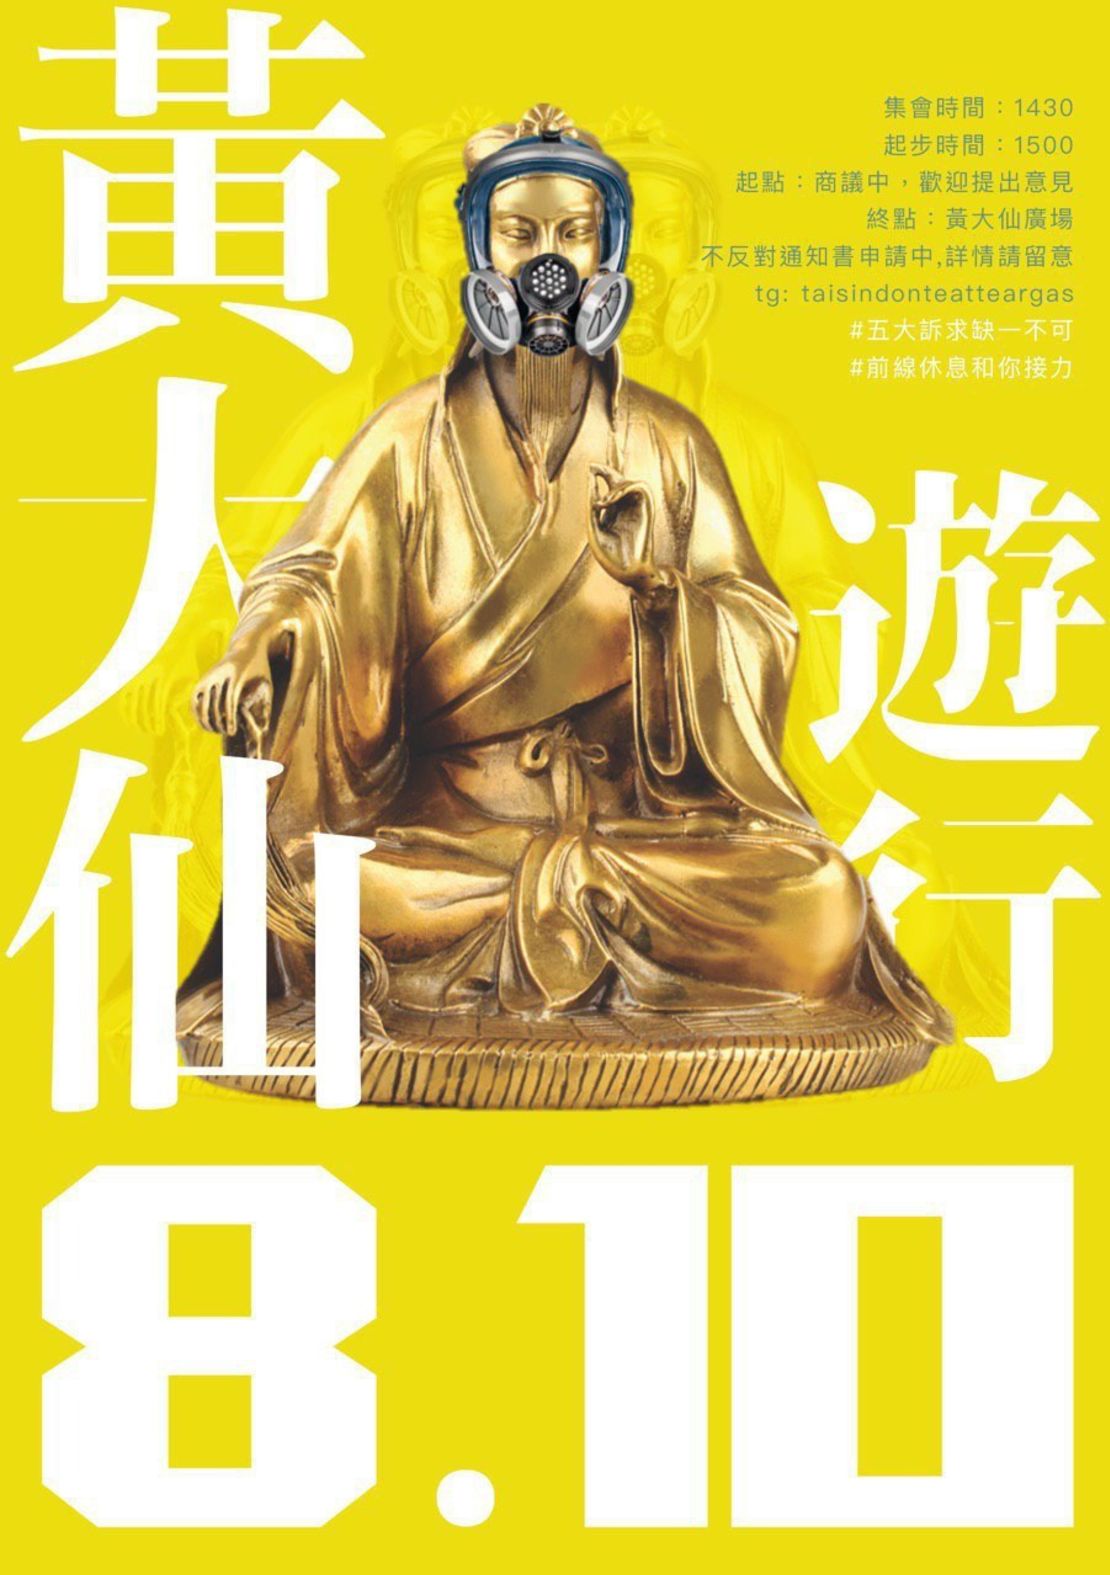 This poster informs people that a protest will be held on August 10 at the Wong Tai Sin district. Wong Tai Sin is famous for its temple, a large traditional complex devoted to a Taoist deity of the same name.